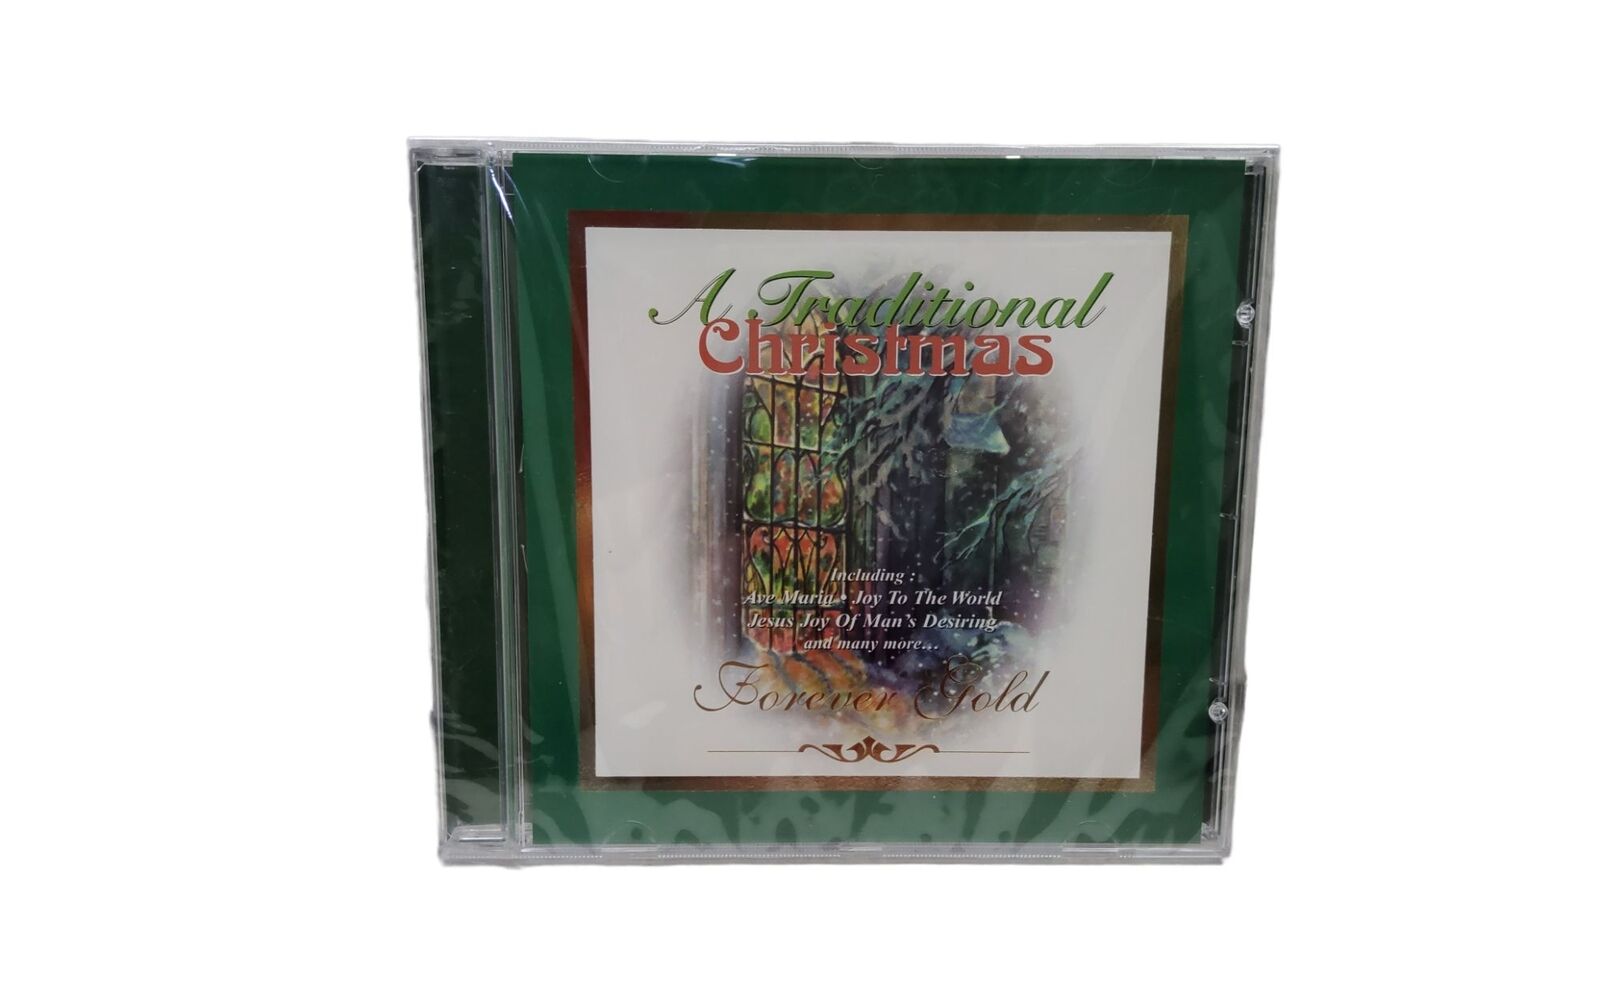 Vintage 1999 A Traditional Christmas, Forever GoldVarious Artists CD